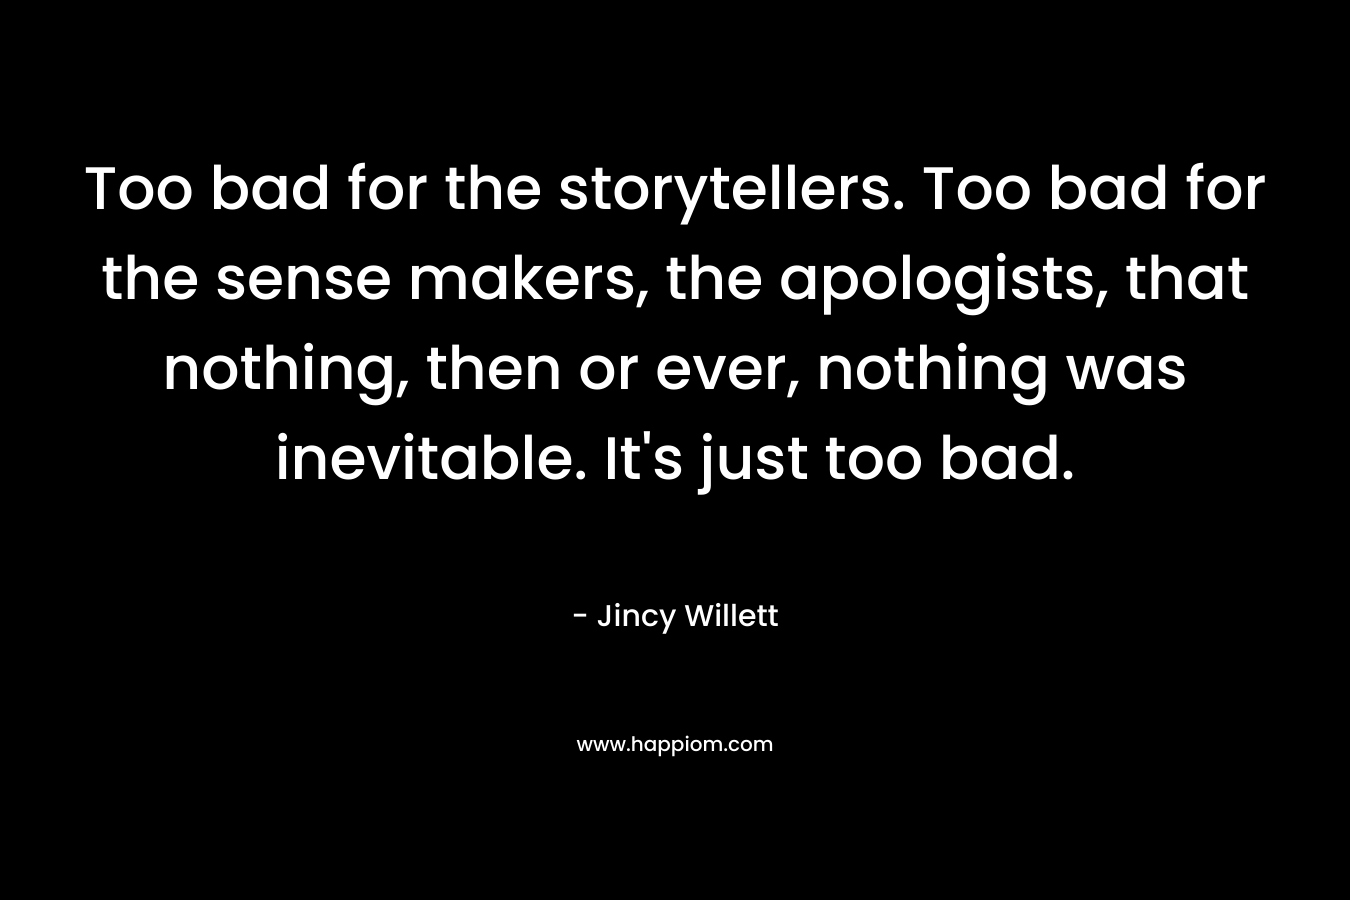 Too bad for the storytellers. Too bad for the sense makers, the apologists, that nothing, then or ever, nothing was inevitable. It’s just too bad. – Jincy Willett